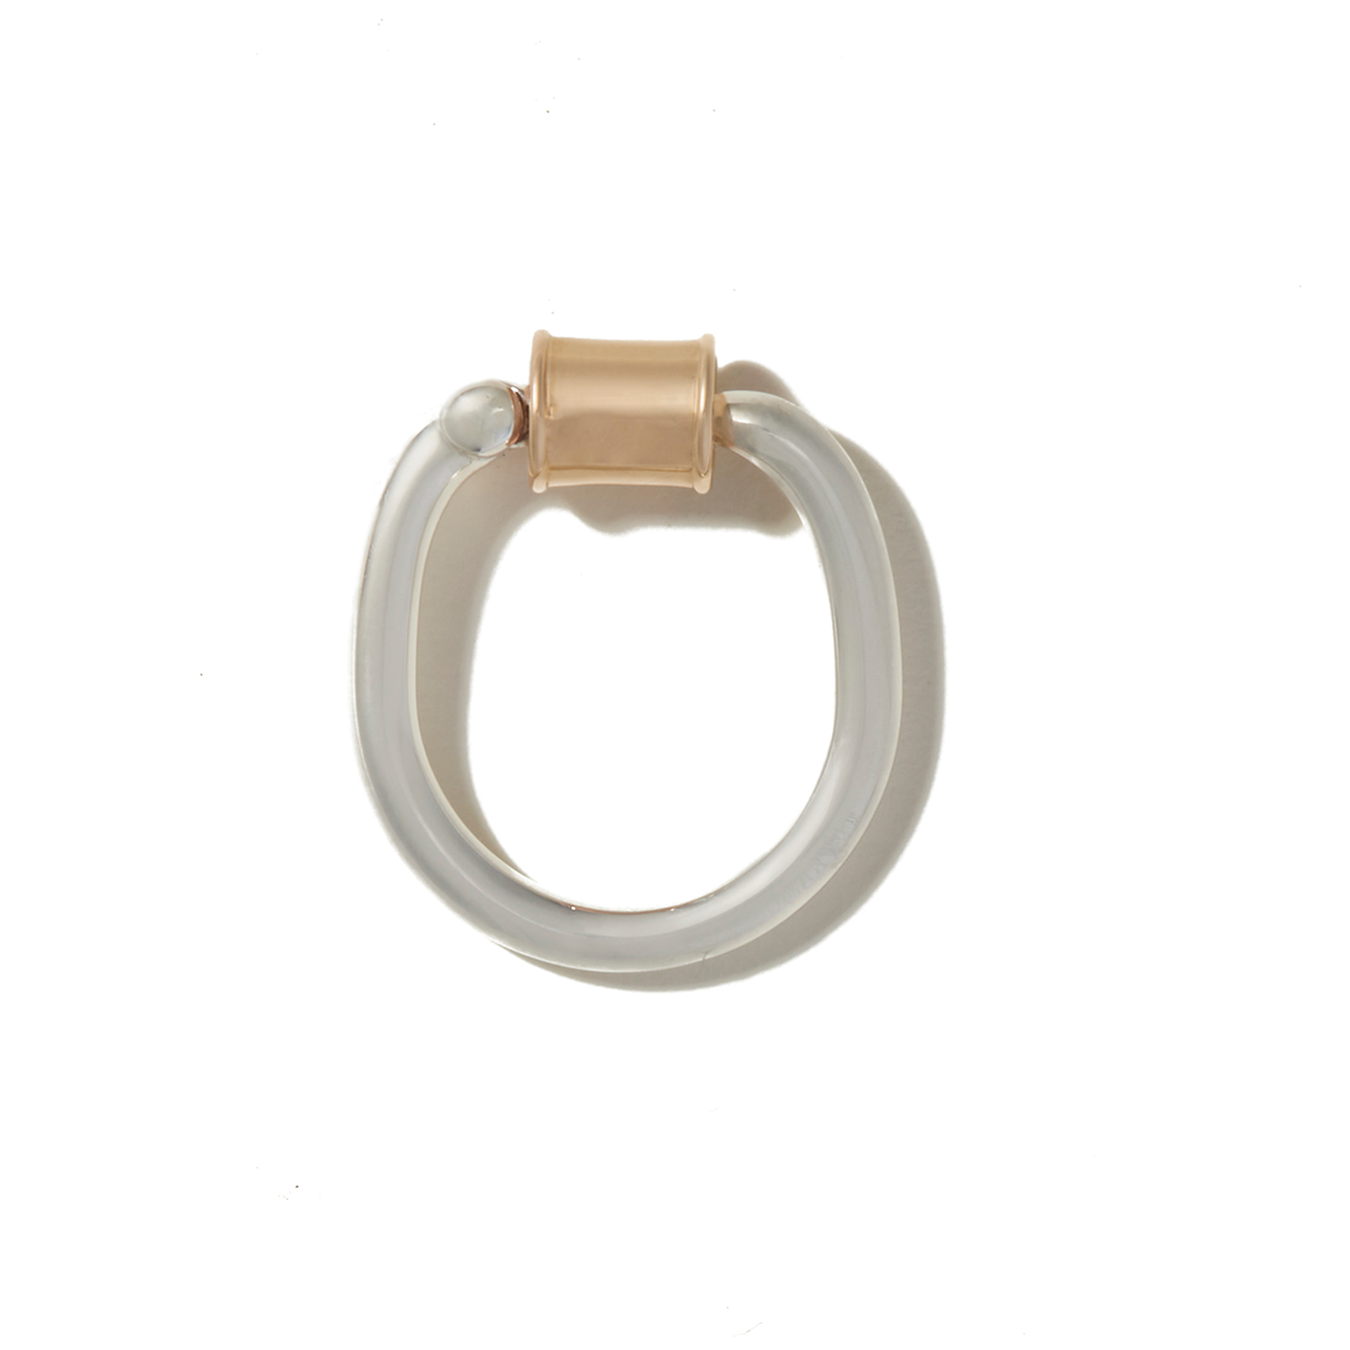 Silver trundle ring with open rose gold clasp